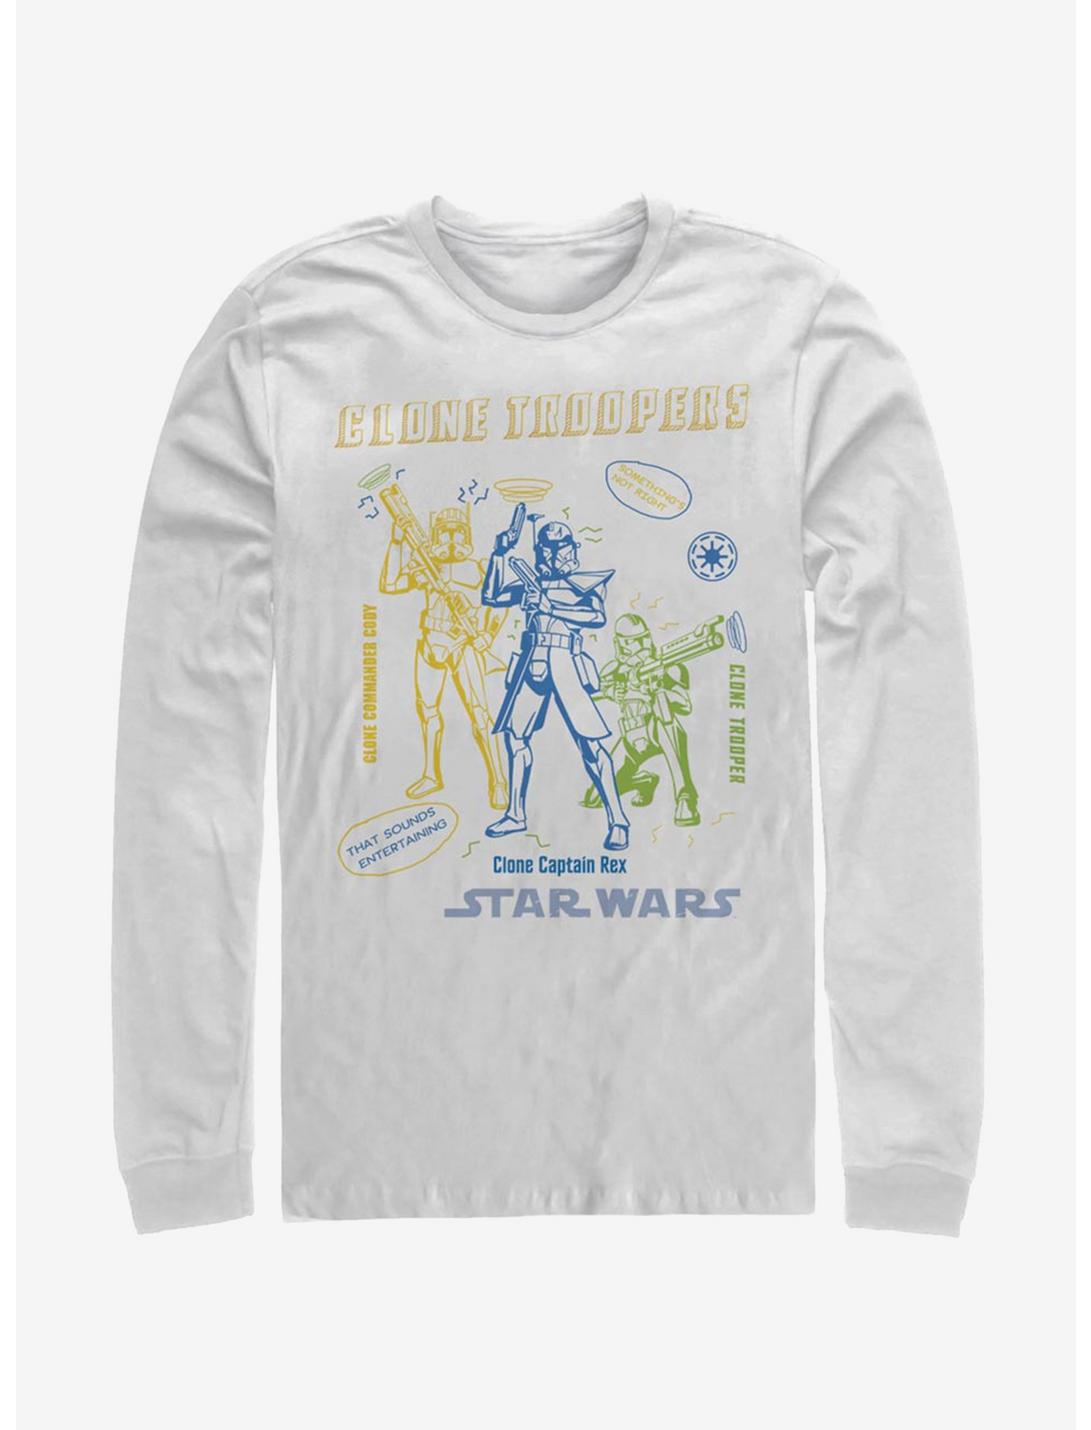 Star Wars The Clone Wars Doodle Trooper Long-Sleeve T-Shirt, WHITE, hi-res